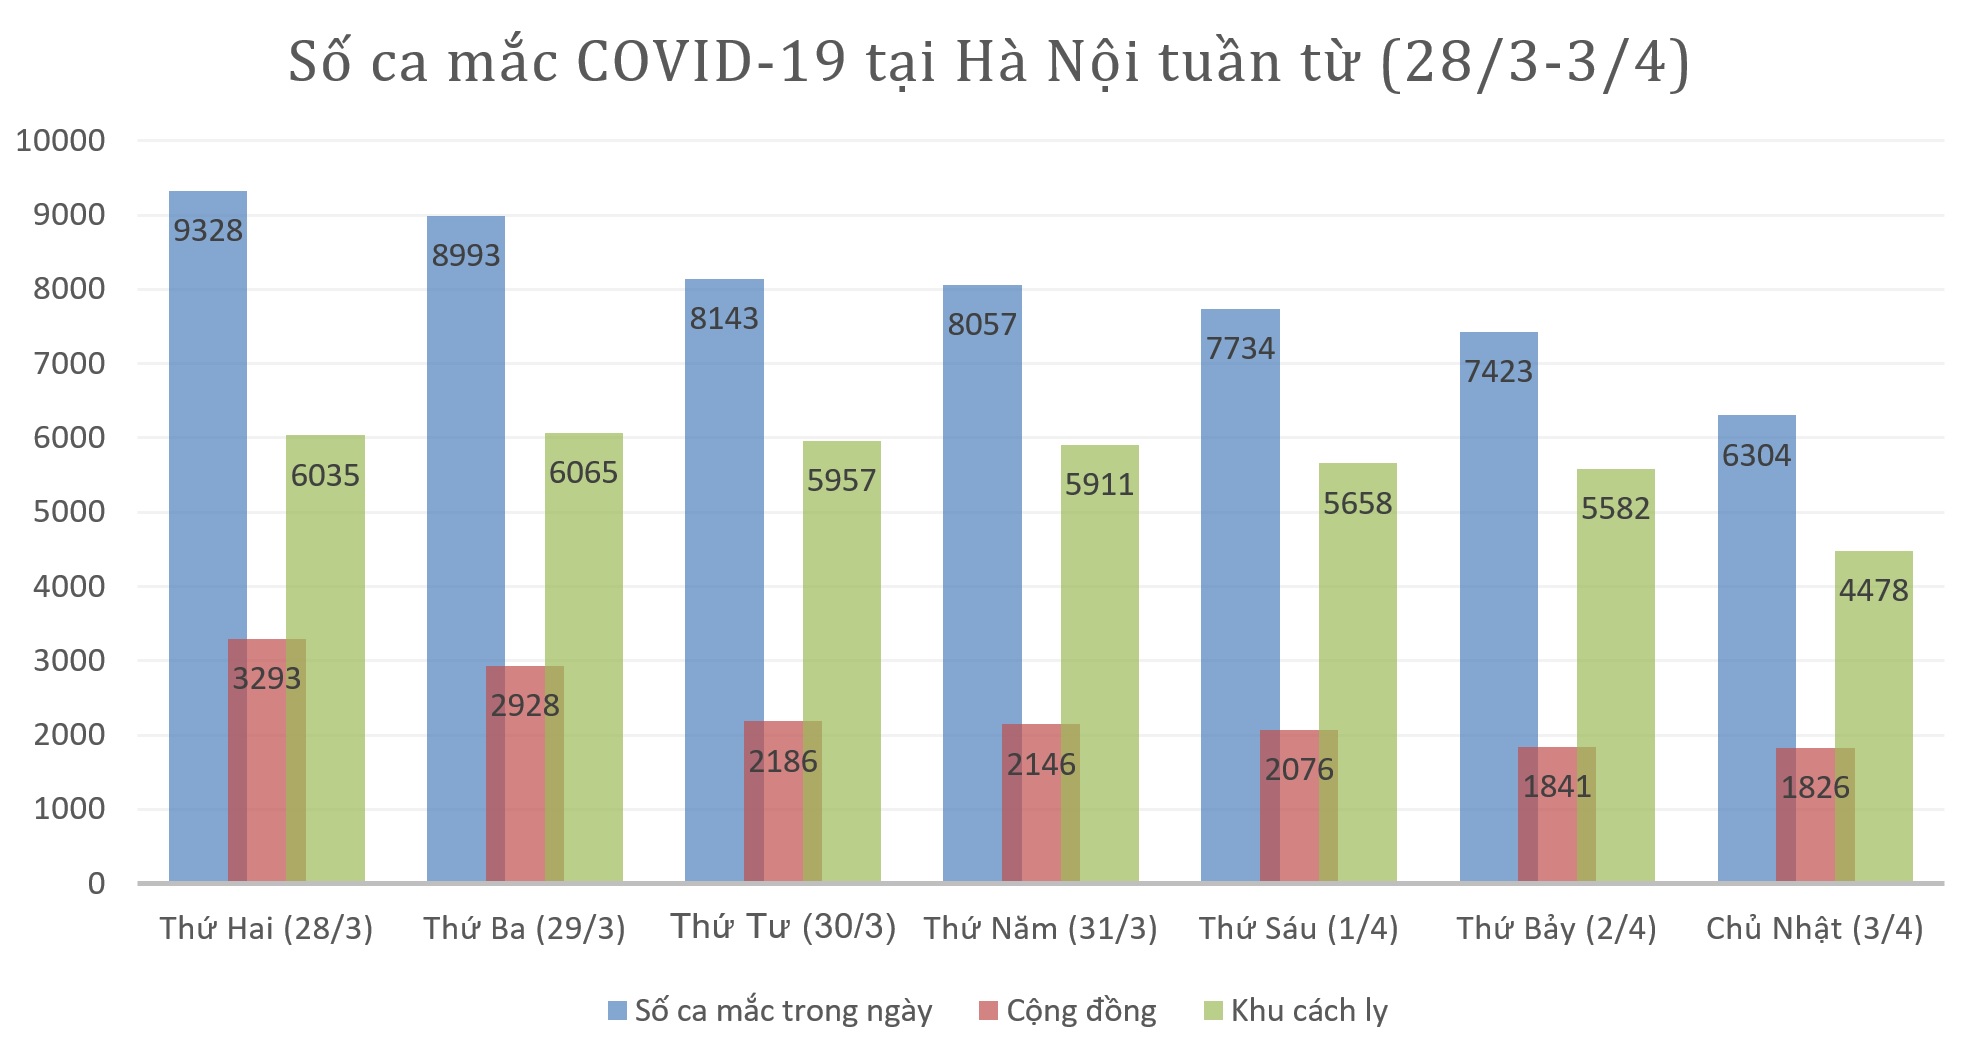 The situation of COVID-19 epidemic in Hanoi in the past 7 days (from March 28 to April 3) - 1